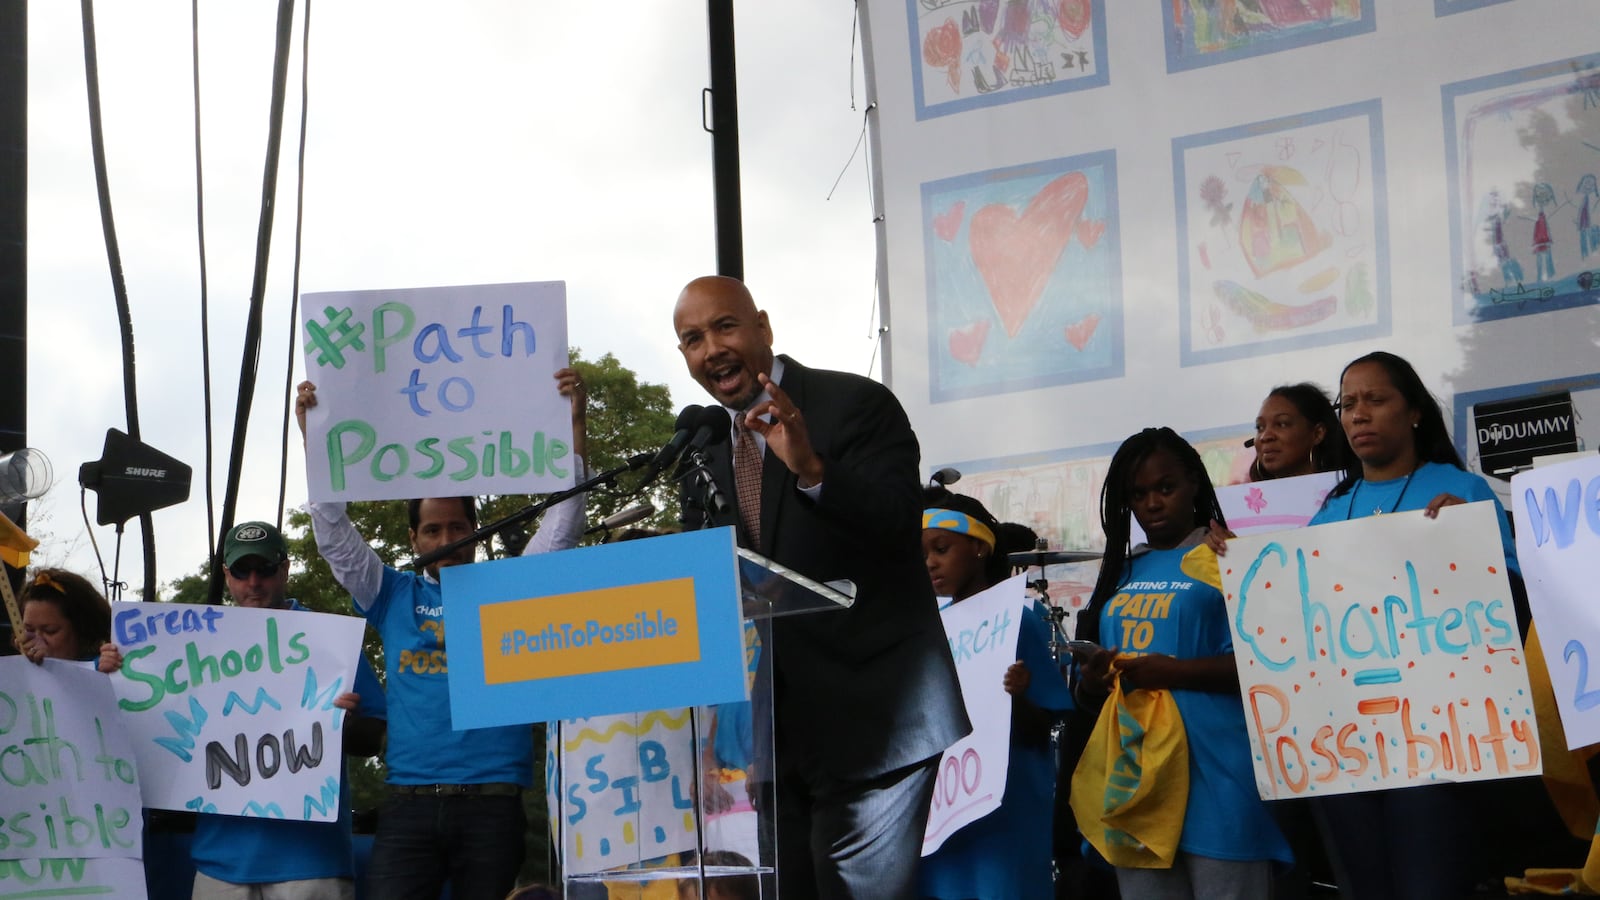 A pro-charter school rally in New York City in 2016.